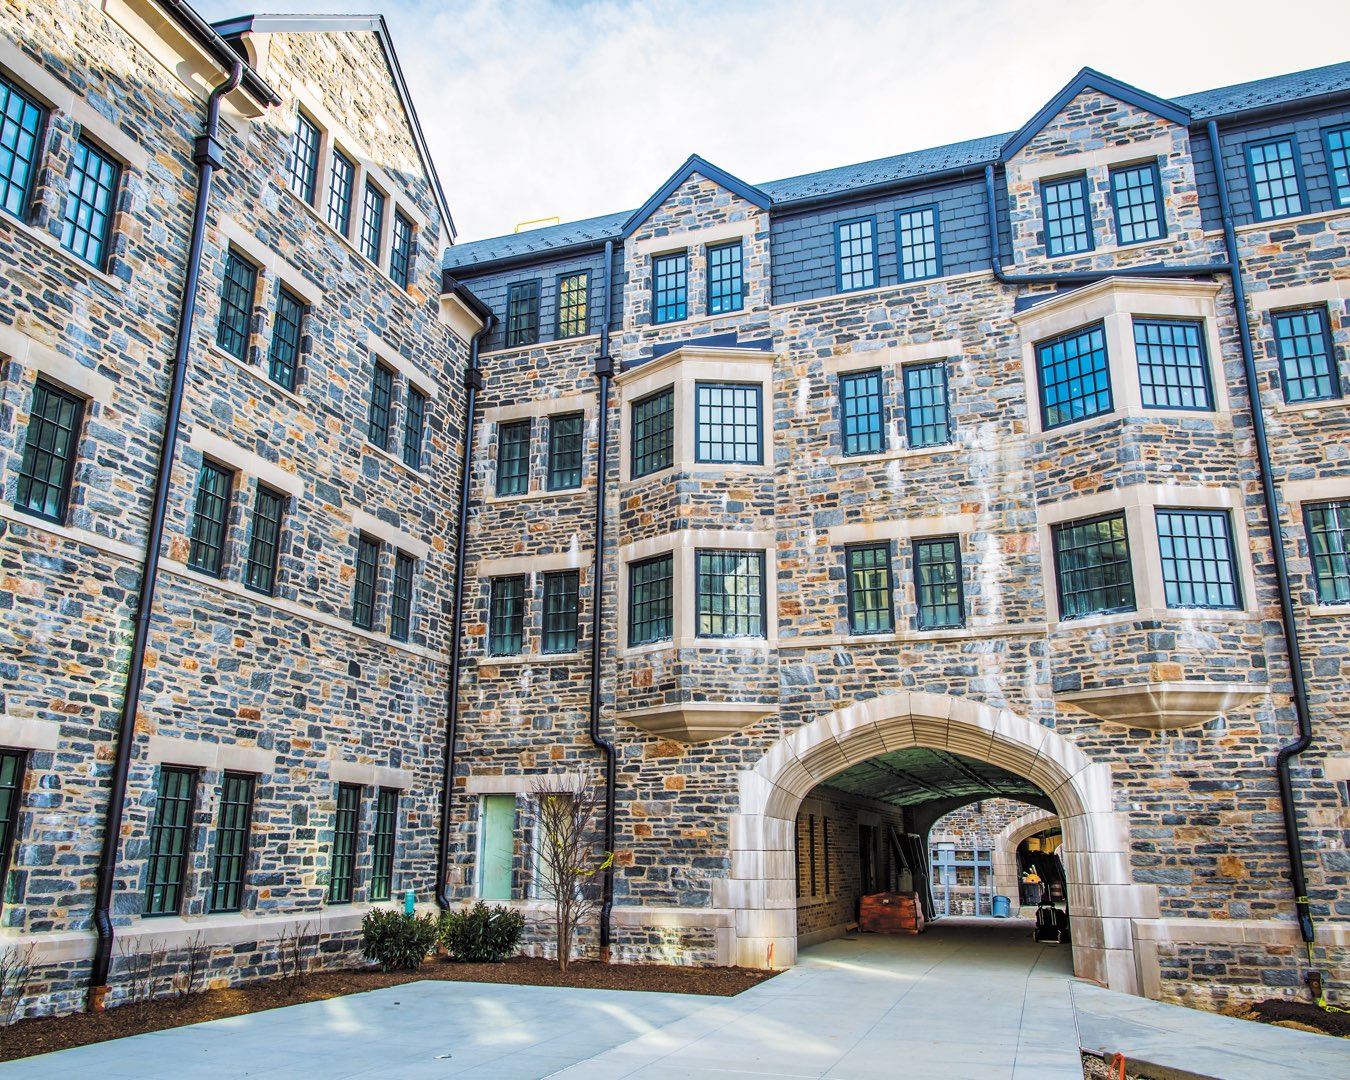 Exterior of The Commons residence halls showing black casement windows, gothic arches, stone facade and faux slate 